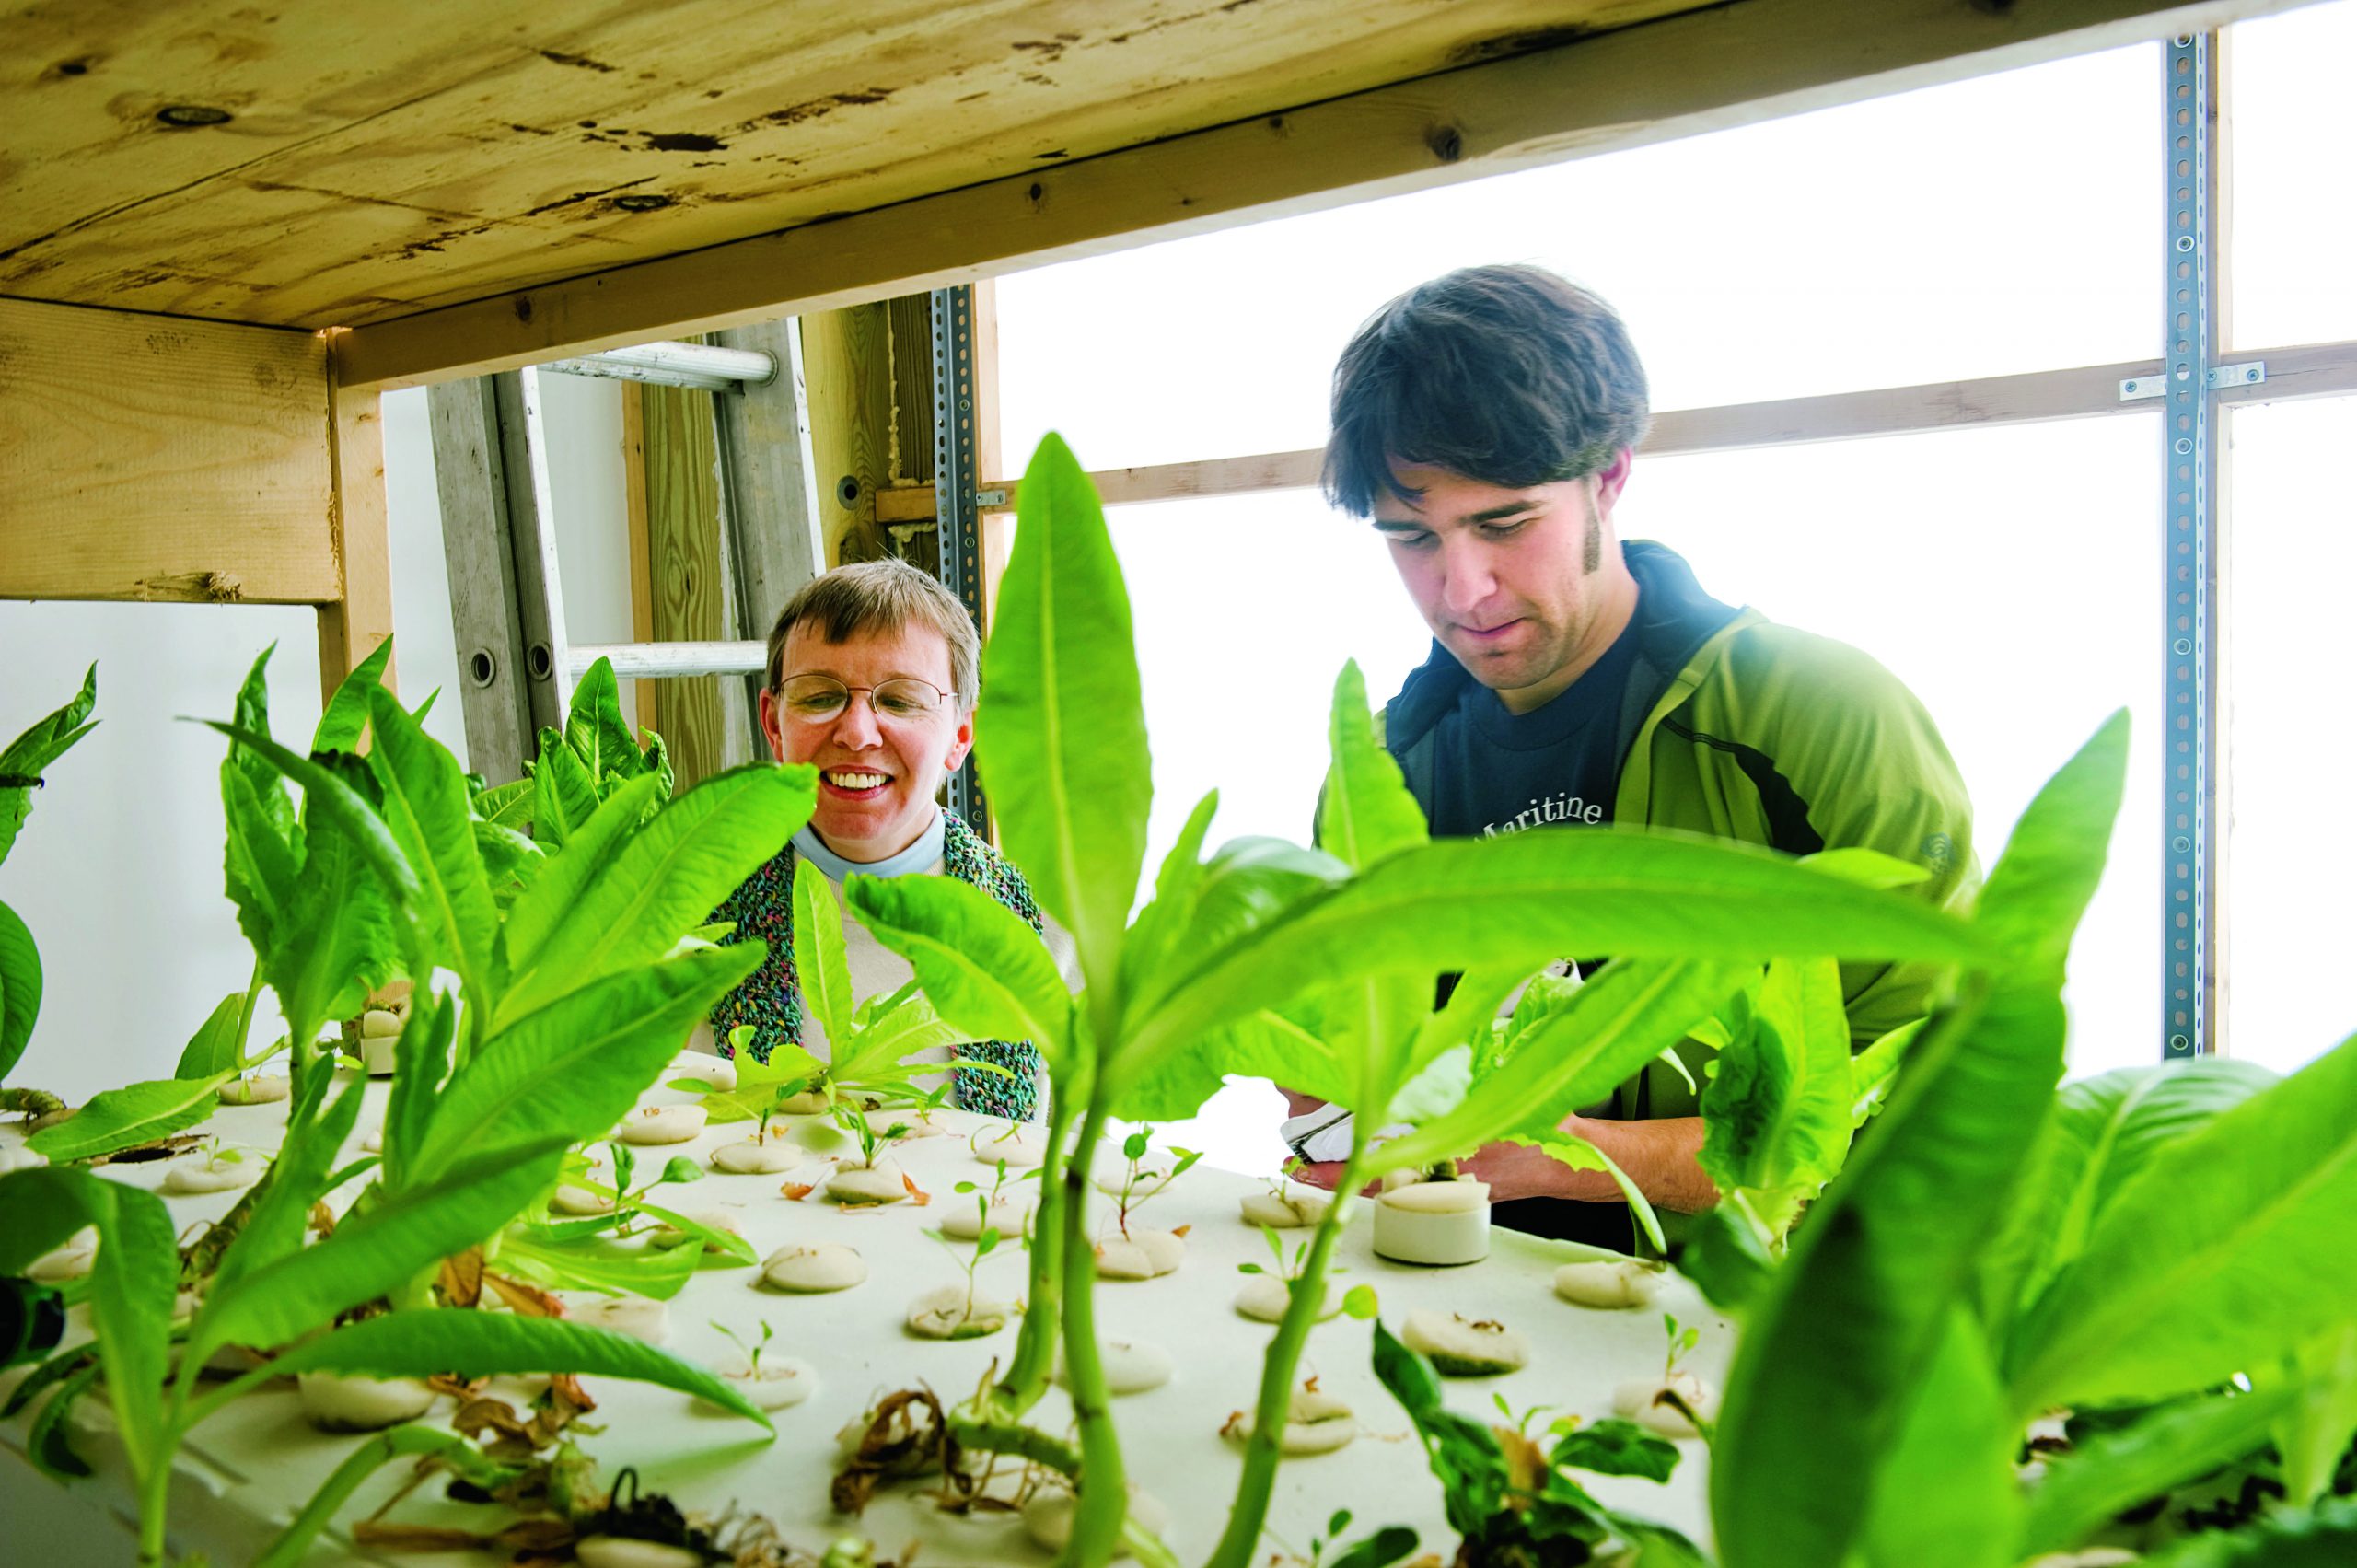 ISE Director Susan Powers works with a student in Clarkson's greenhouse on growing plants.